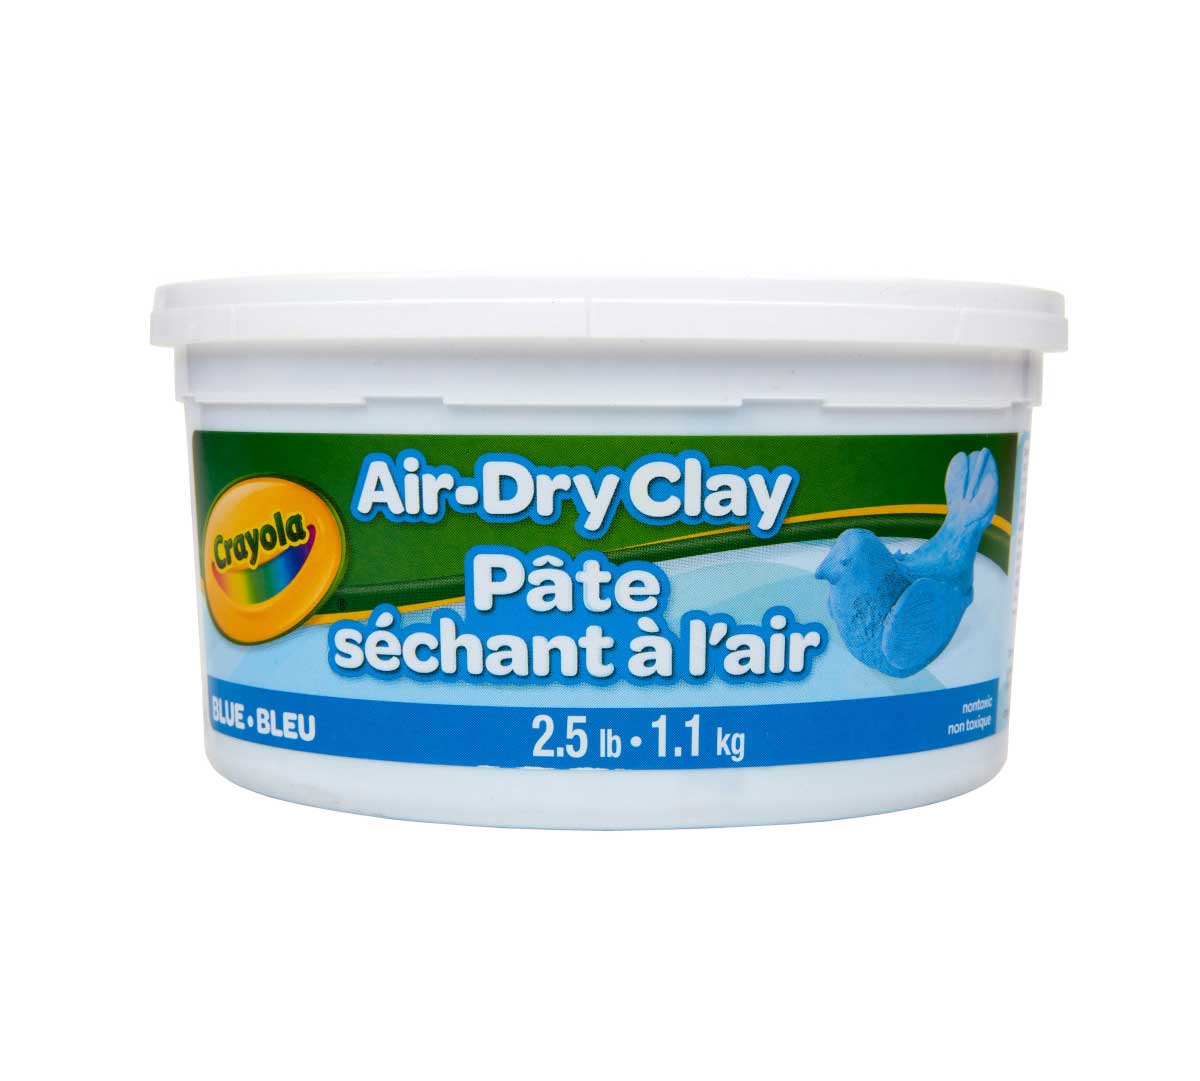  Crayola Air Dry Clay, White, 5Lb Bucket, No Bake Clay for Kids,  Gift : Toys & Games